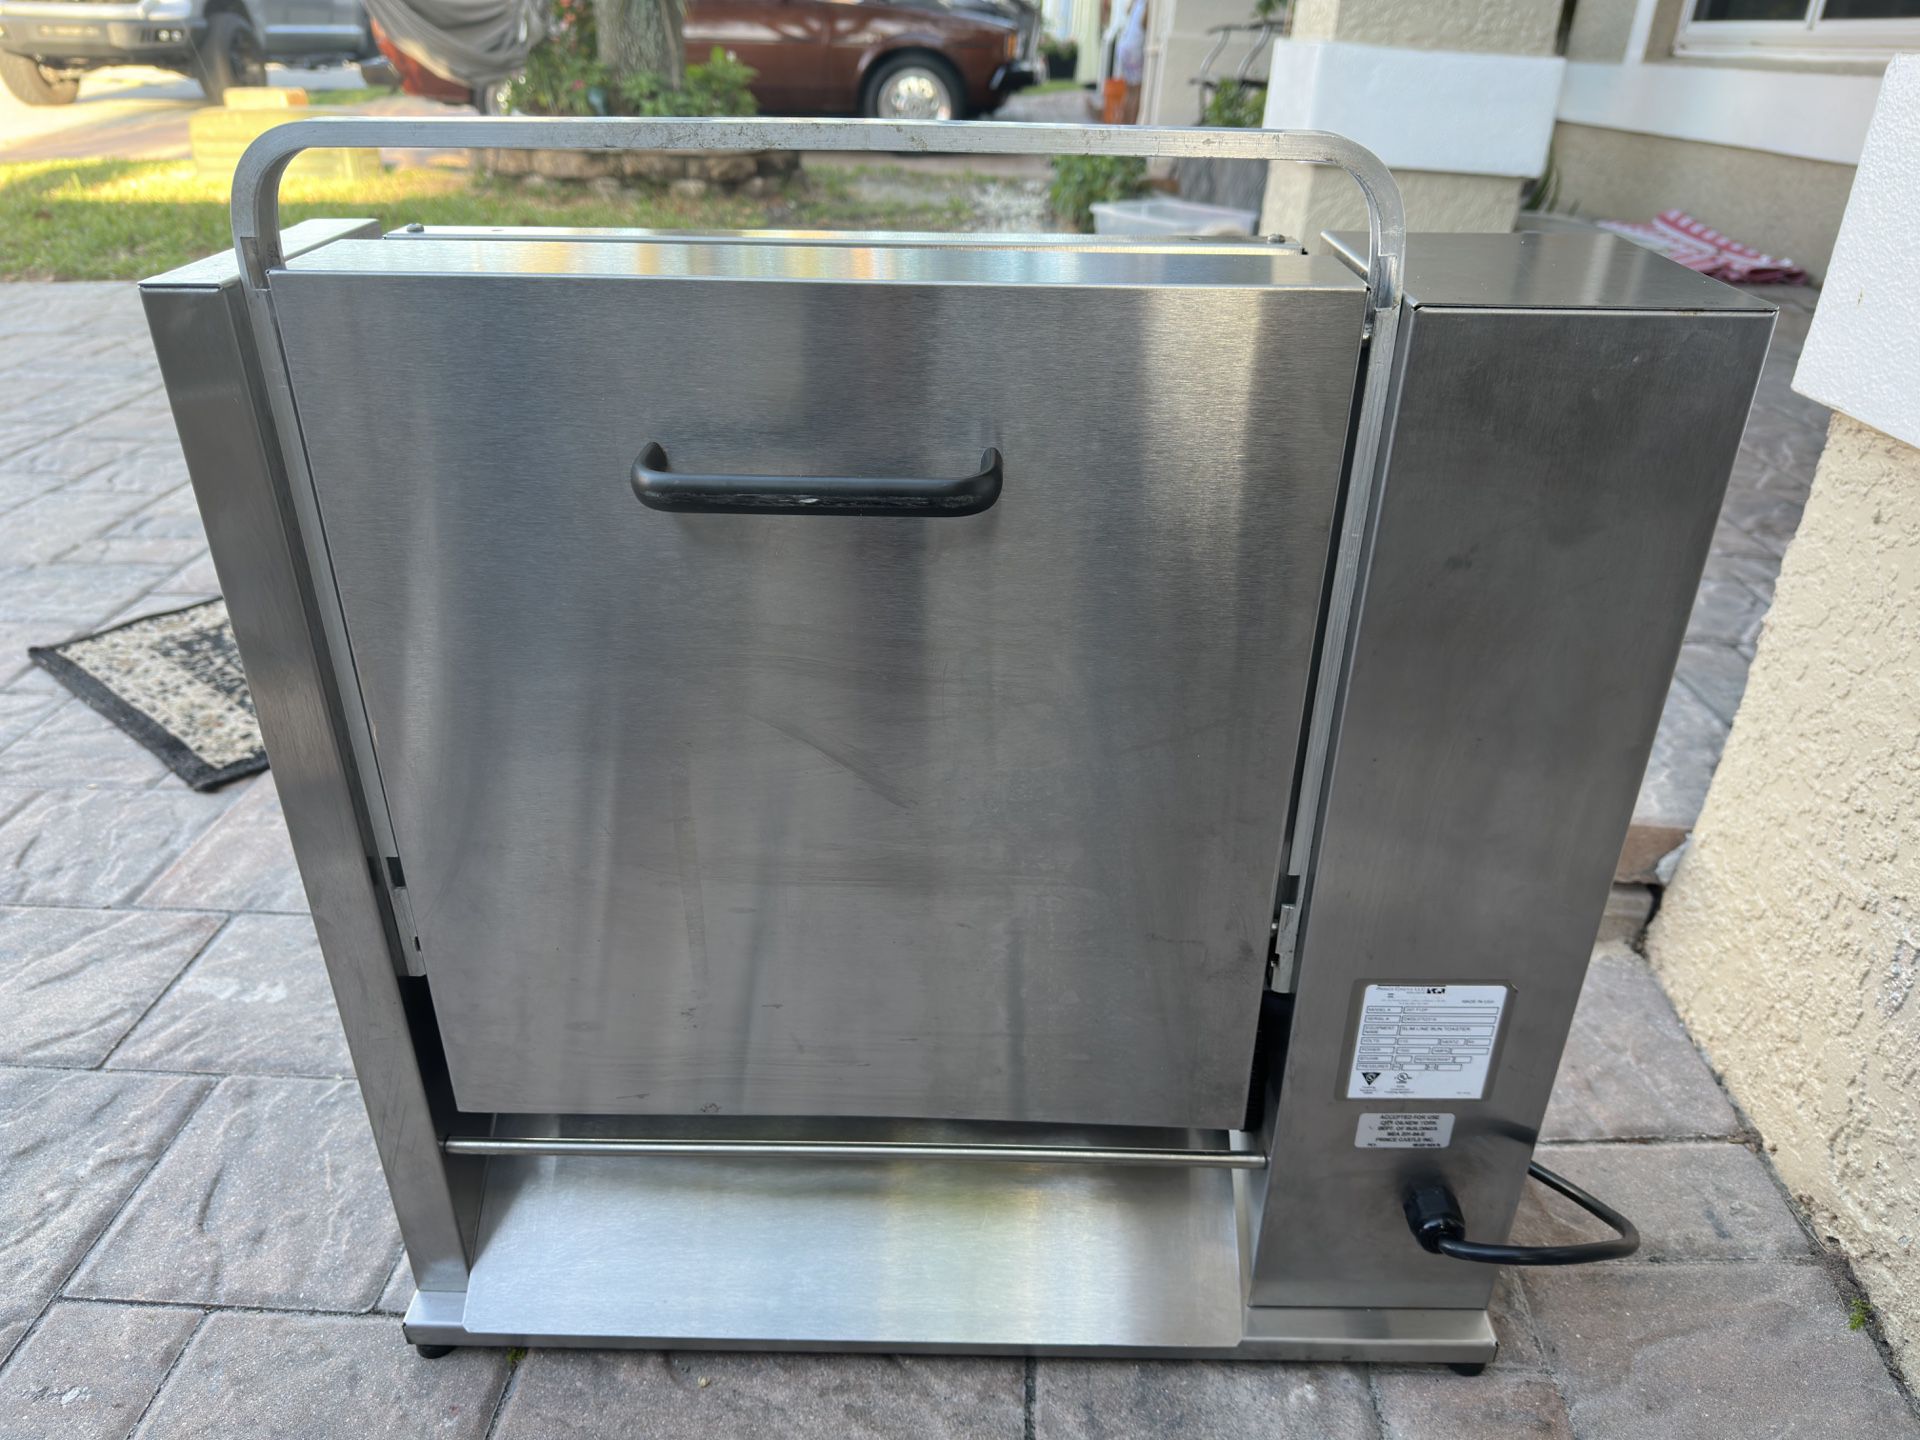 Used Prince Castle Slim Line Contact Bun Toaster for Sale in San An